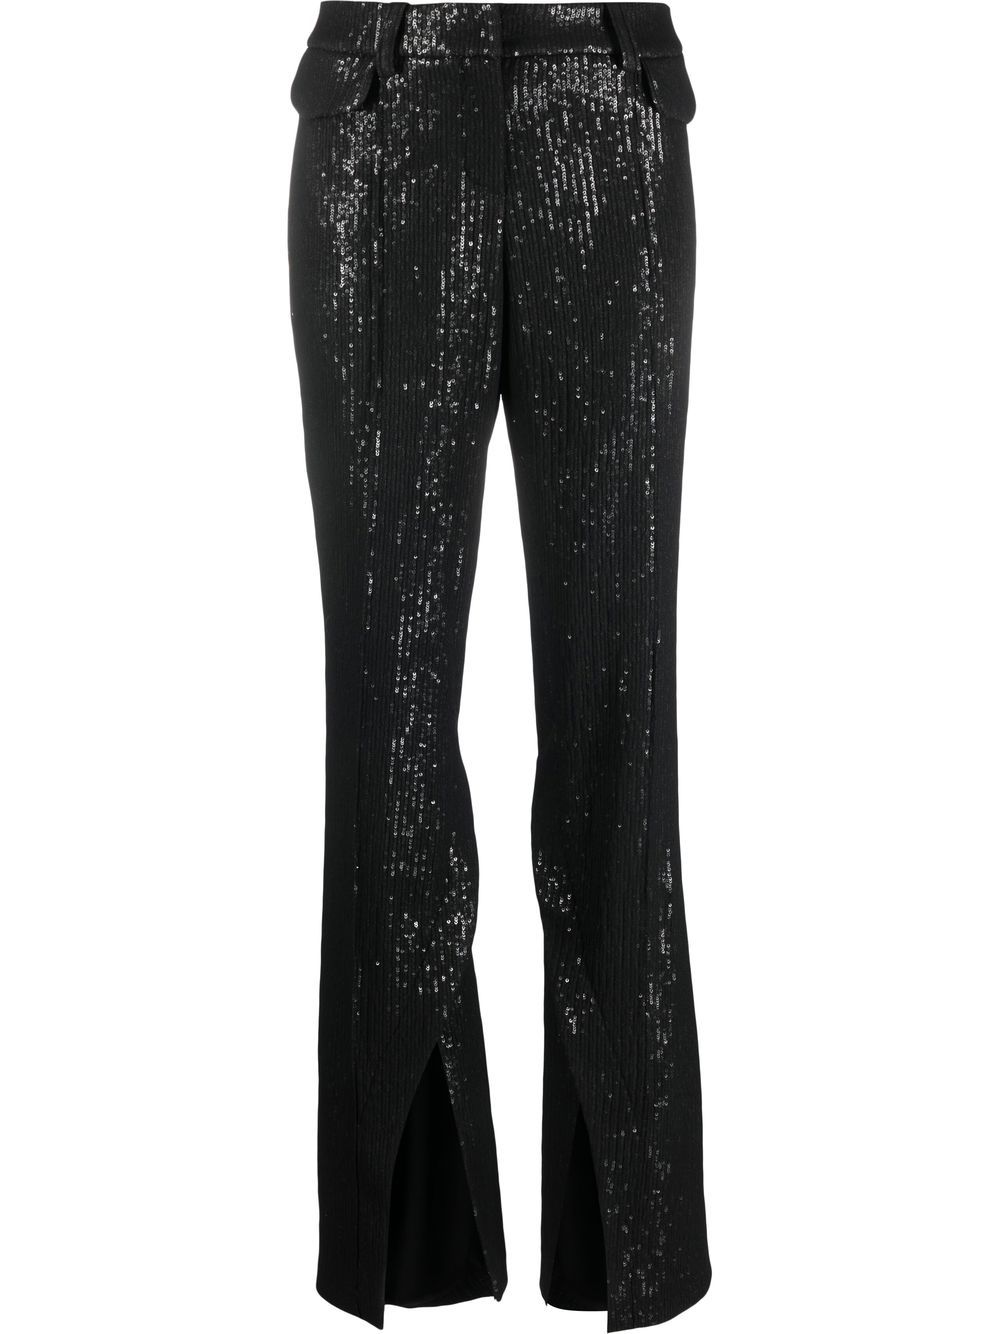 THE MANNEI SEQUIN-EMBELLISHED FLARED TROUSERS